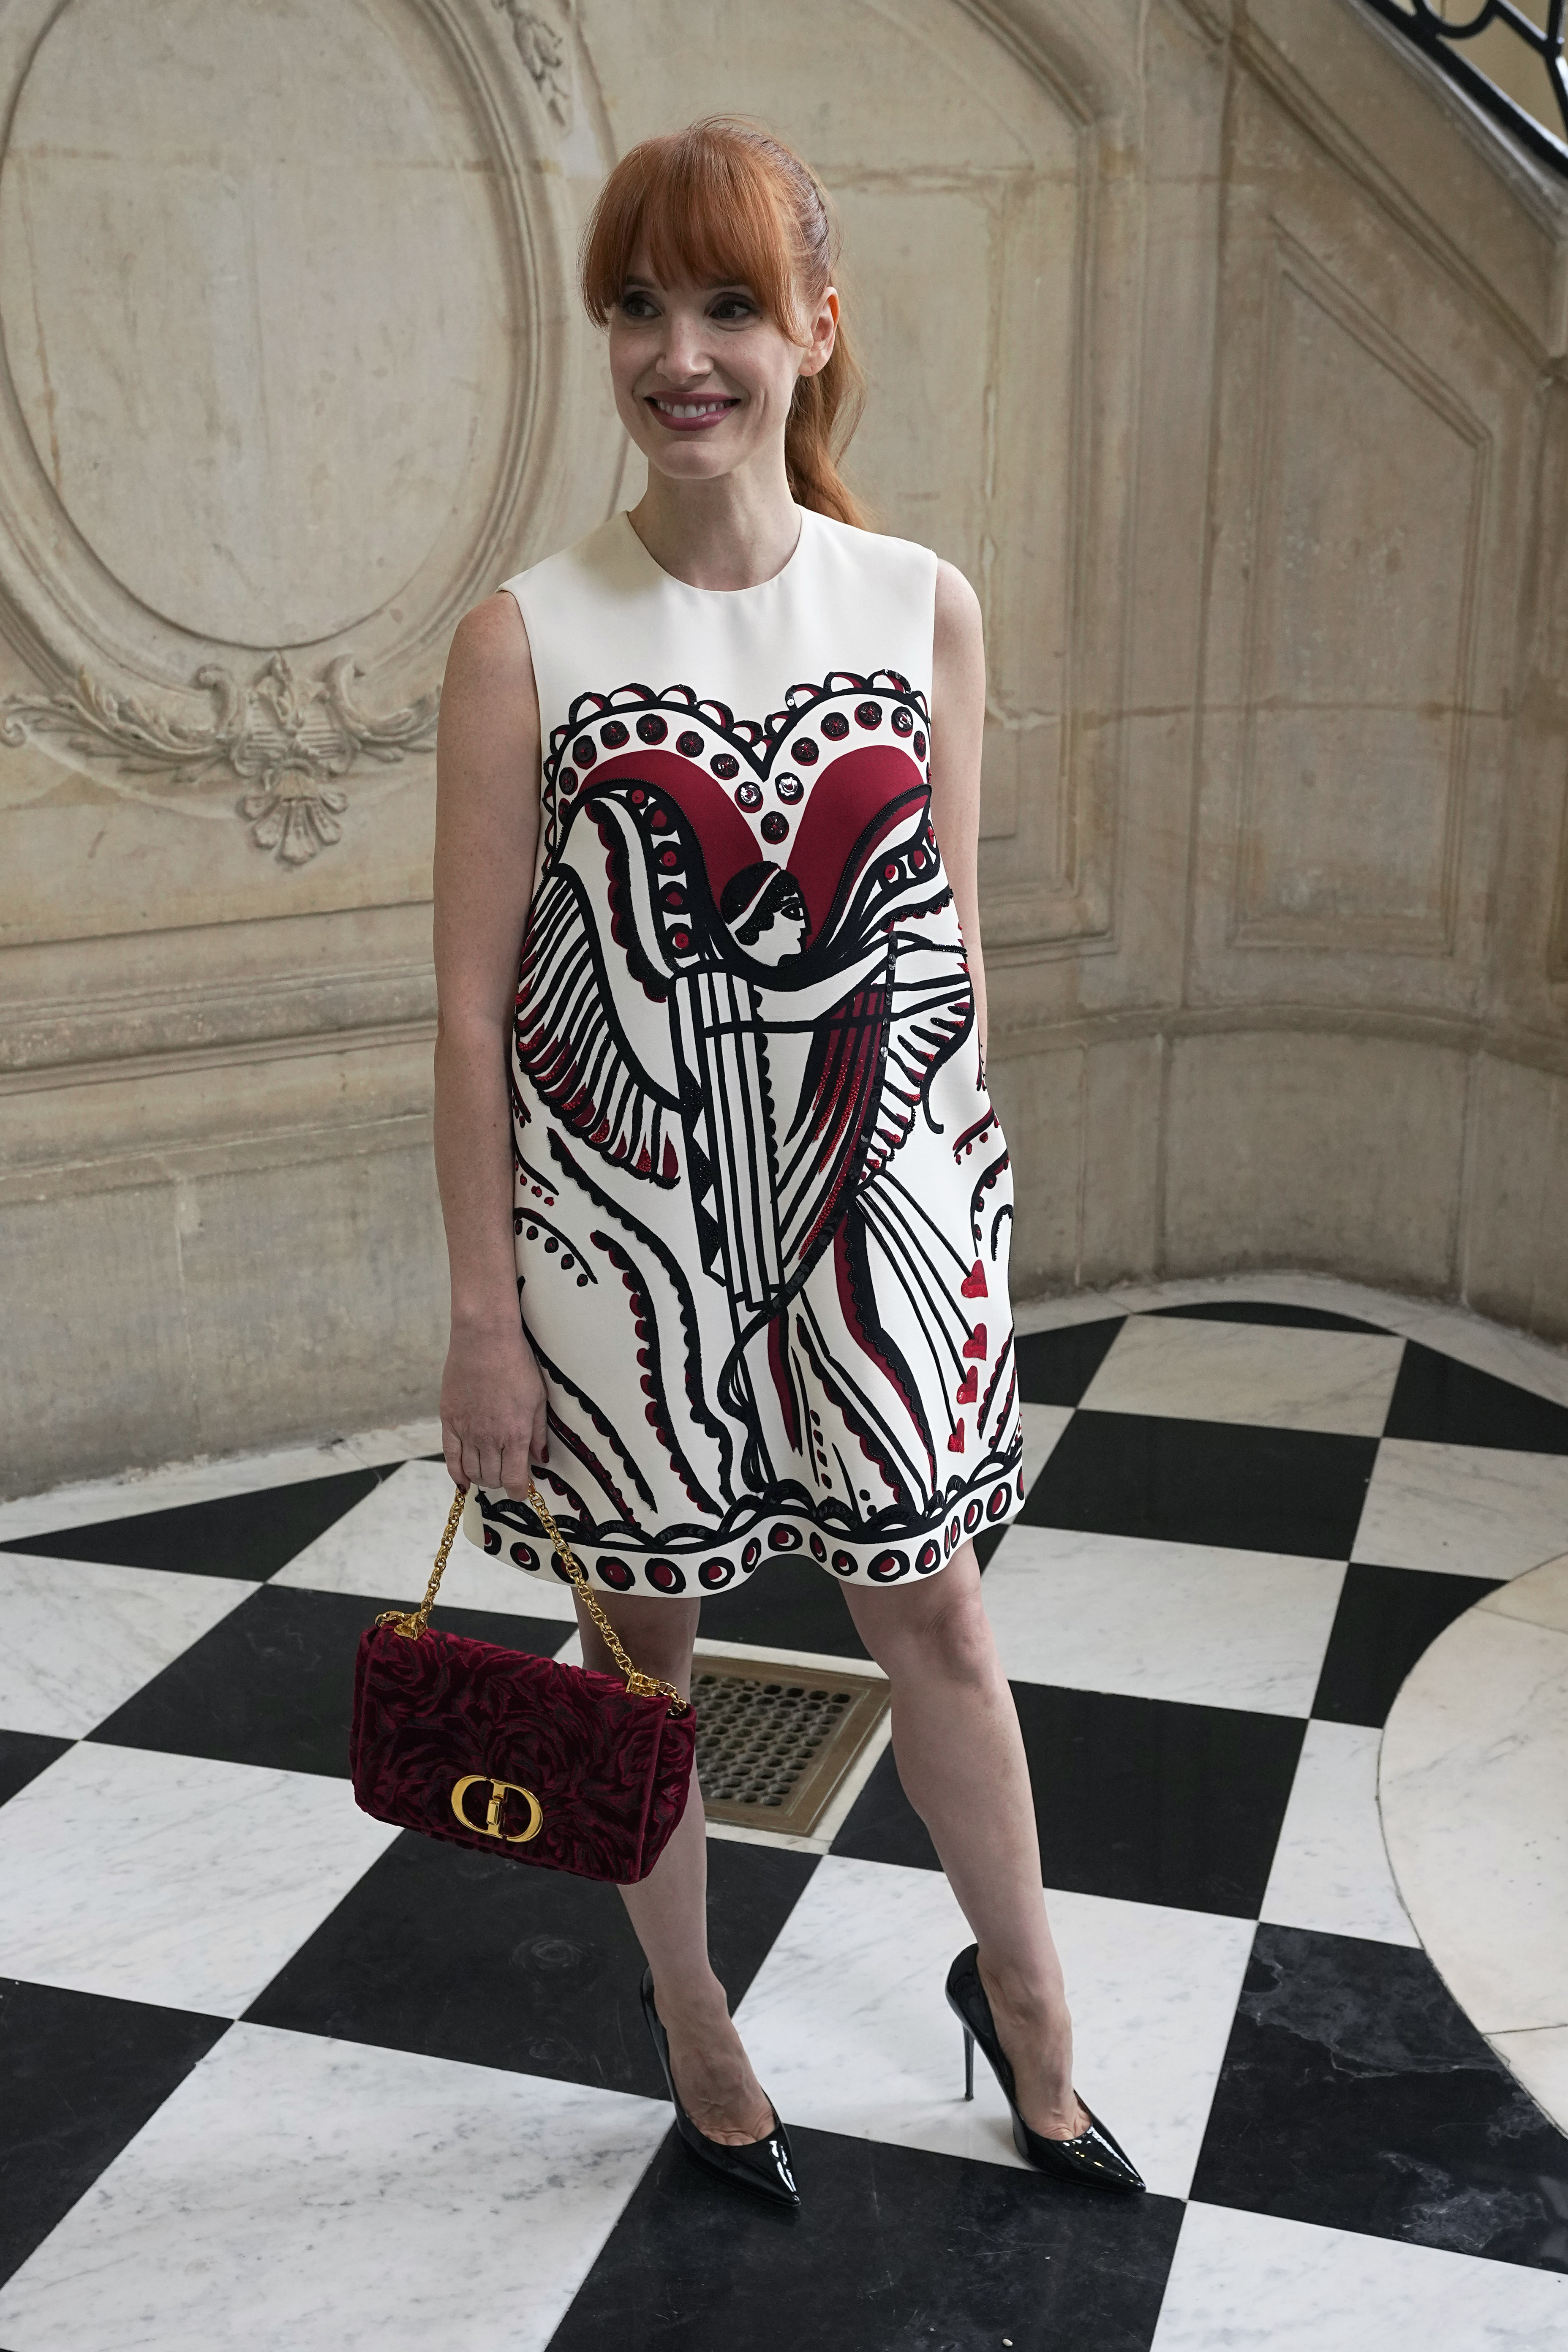 Paris Haute Couture Week: All the best celebrity looks from the